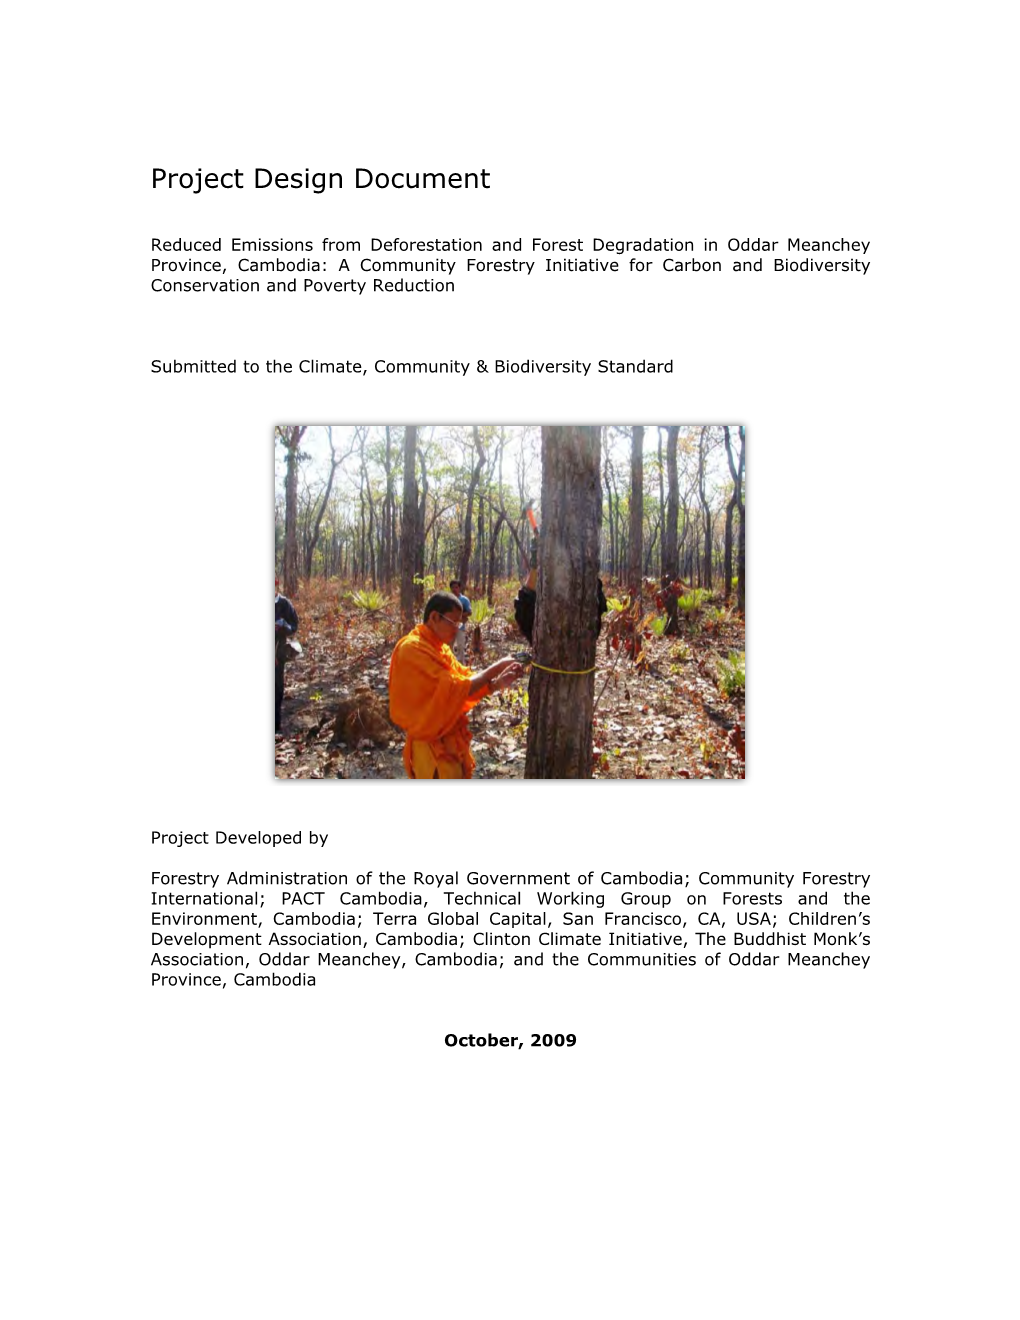 Oddar Meanchey Project Design Document for CCBA, April 2009